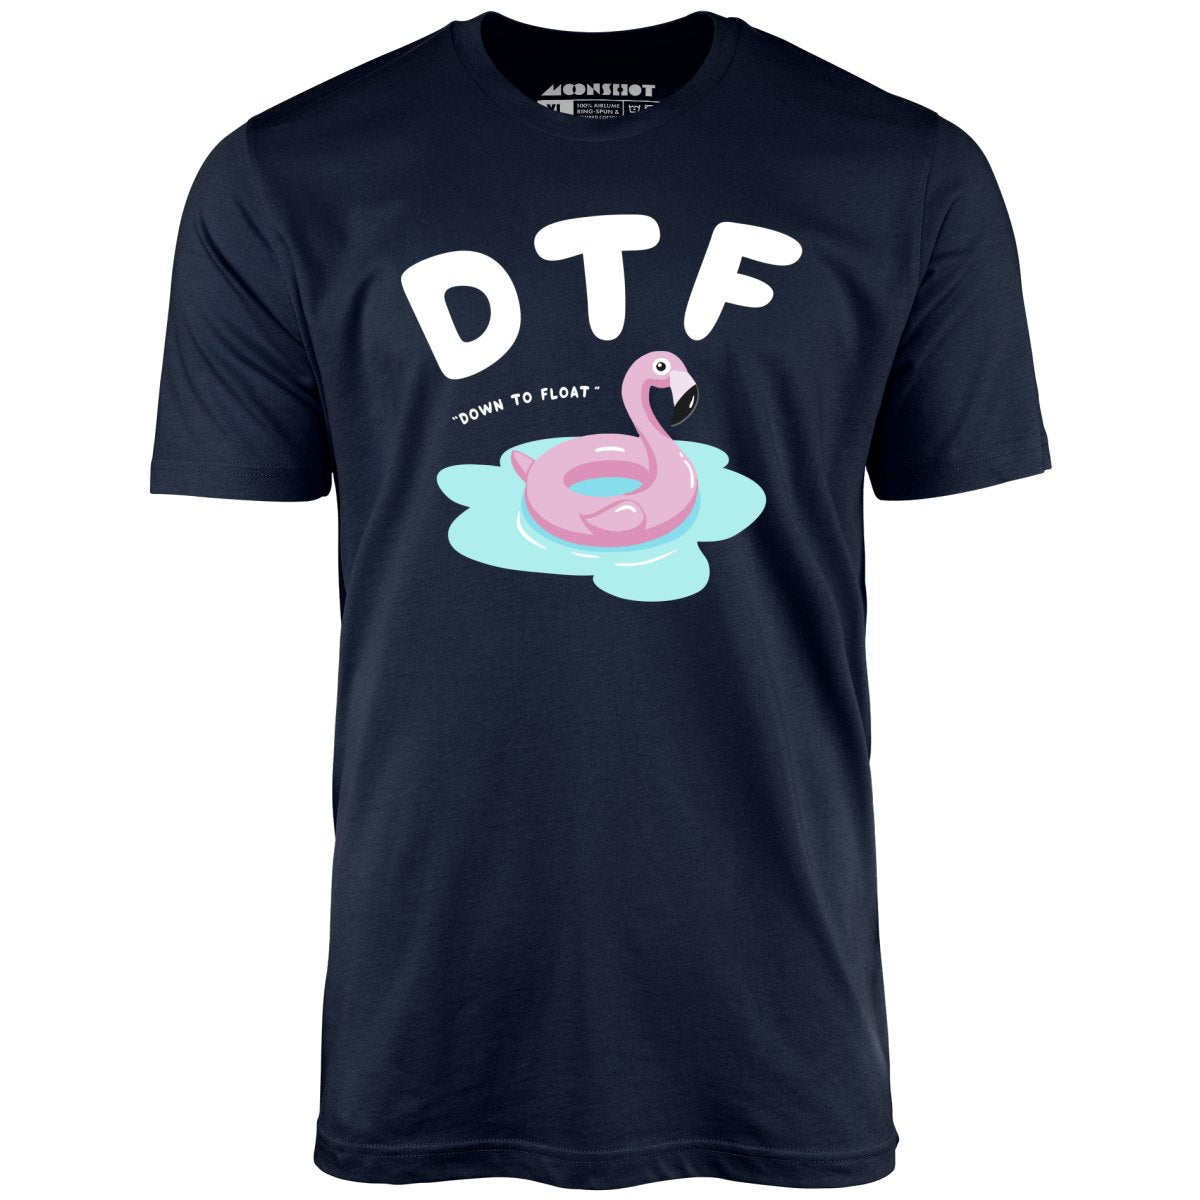 Down to Float - Unisex T-Shirt